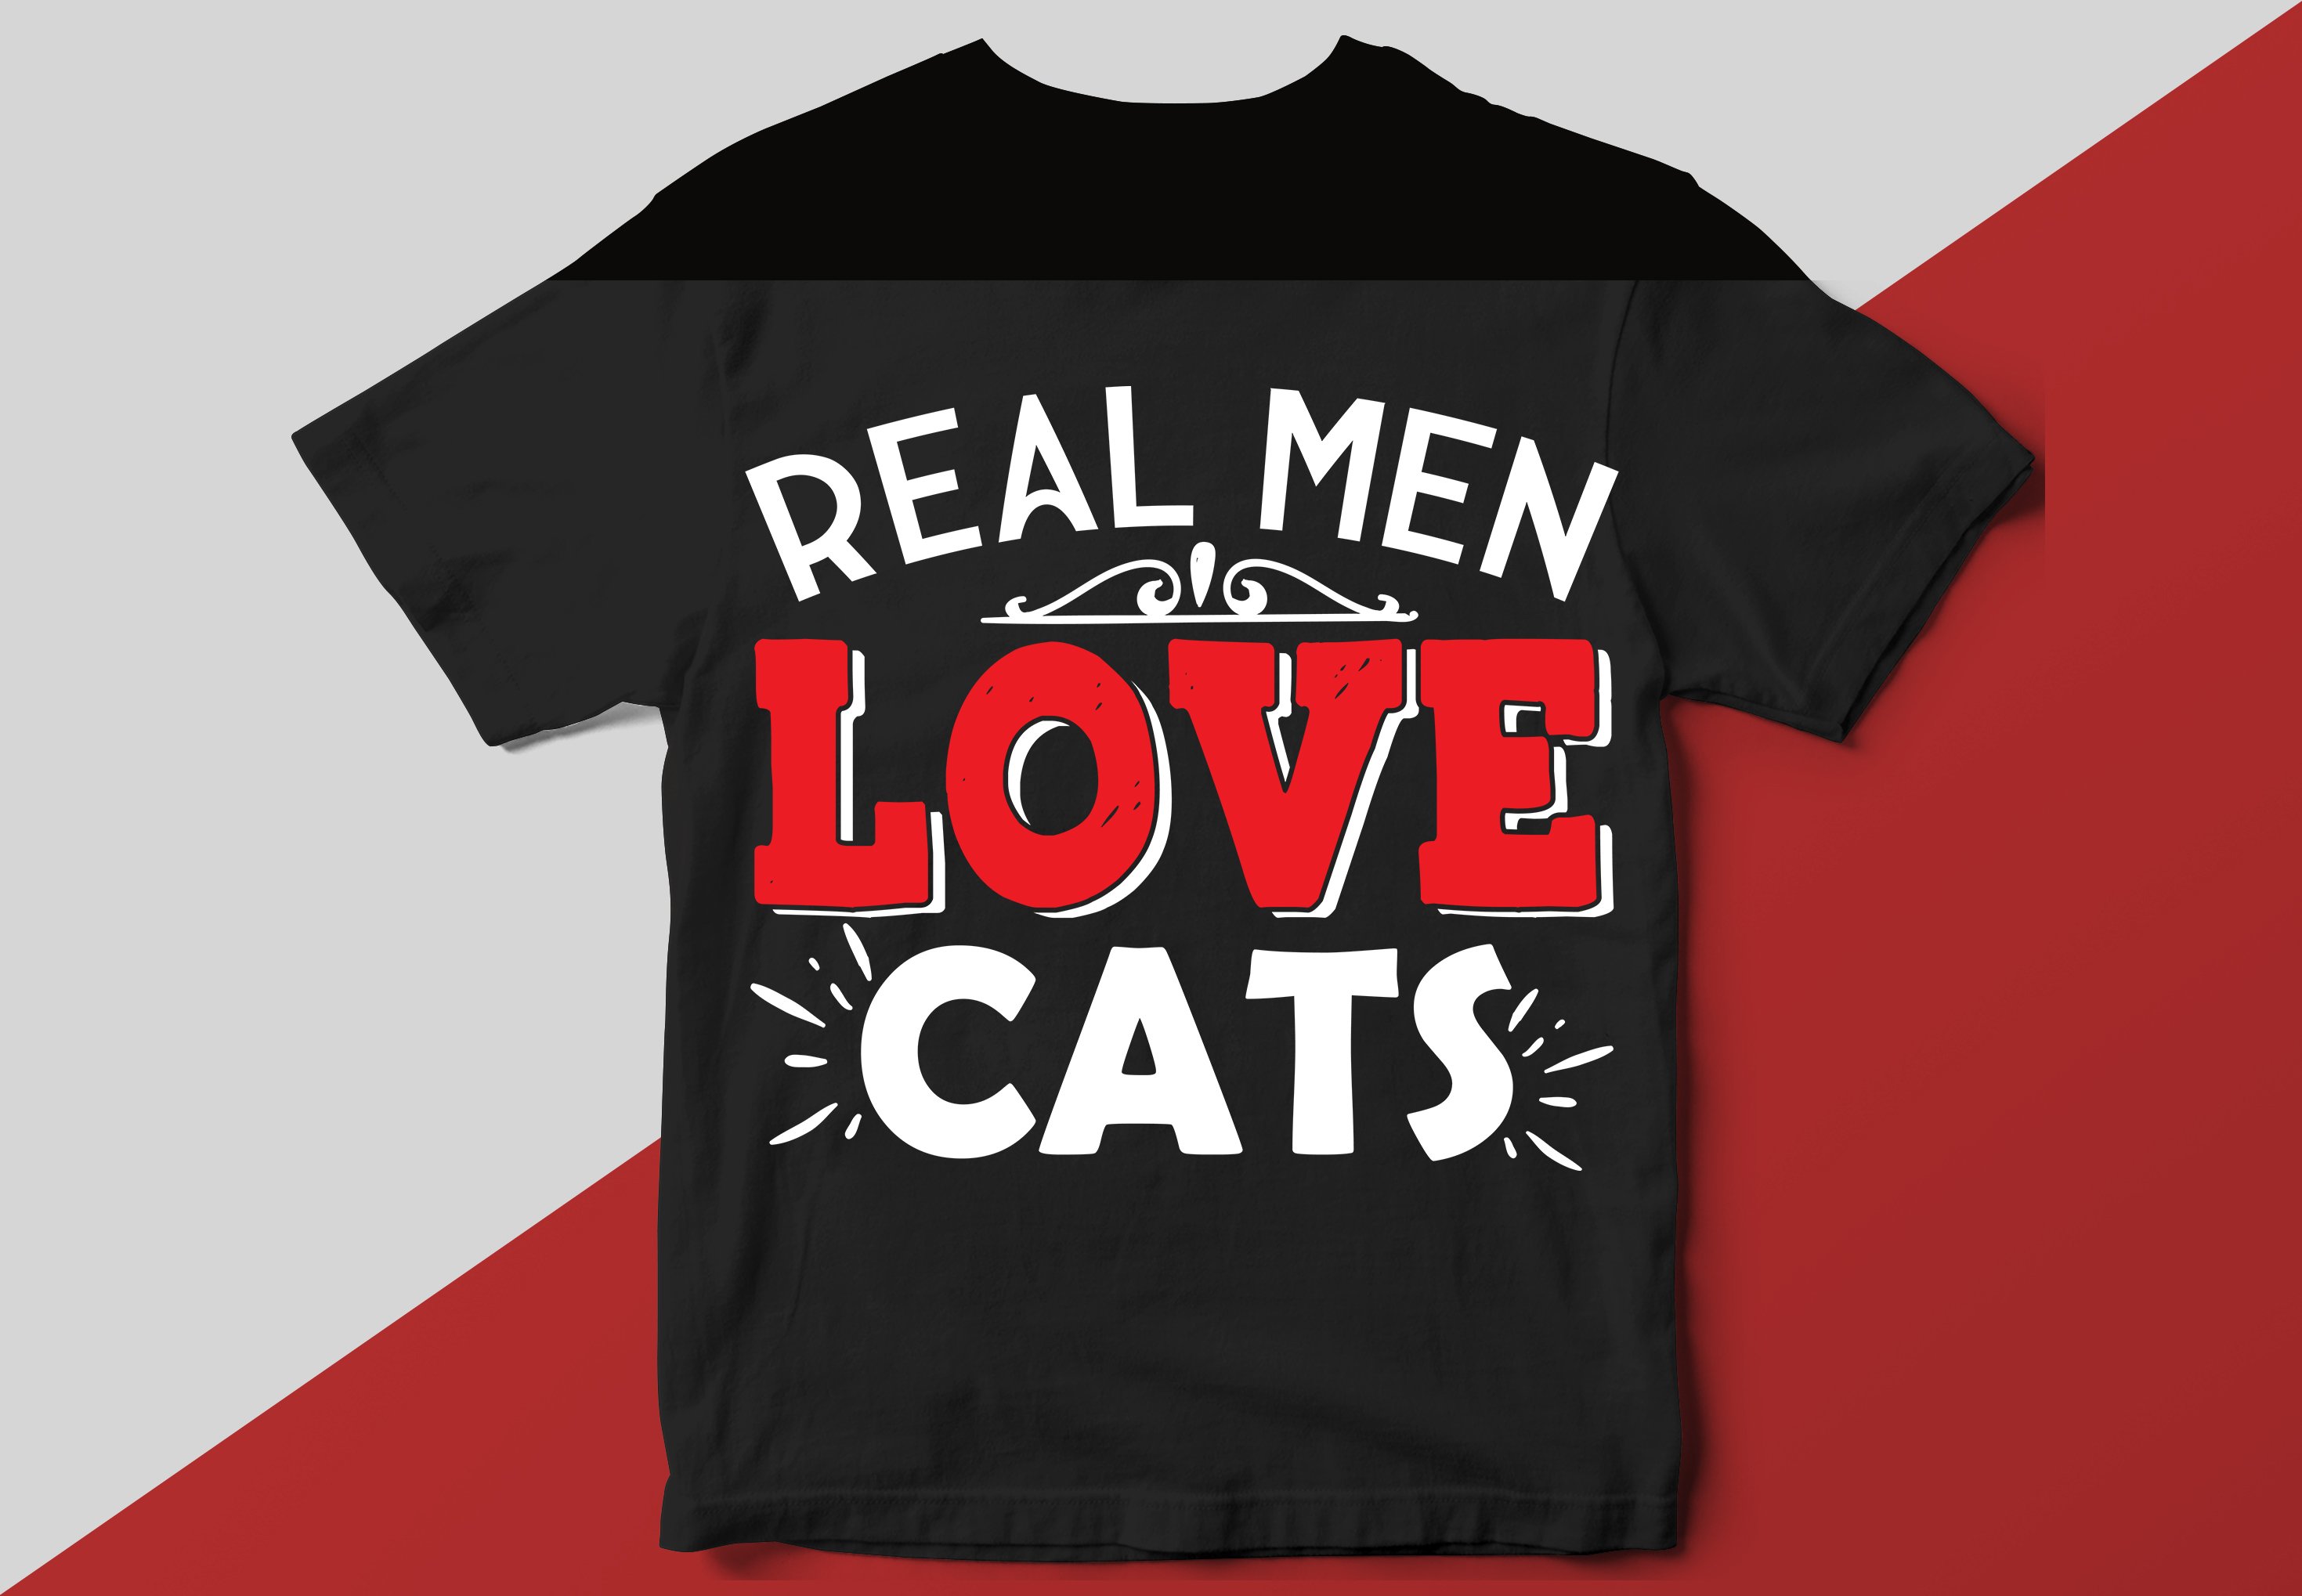 T-shirt for real men love cats.